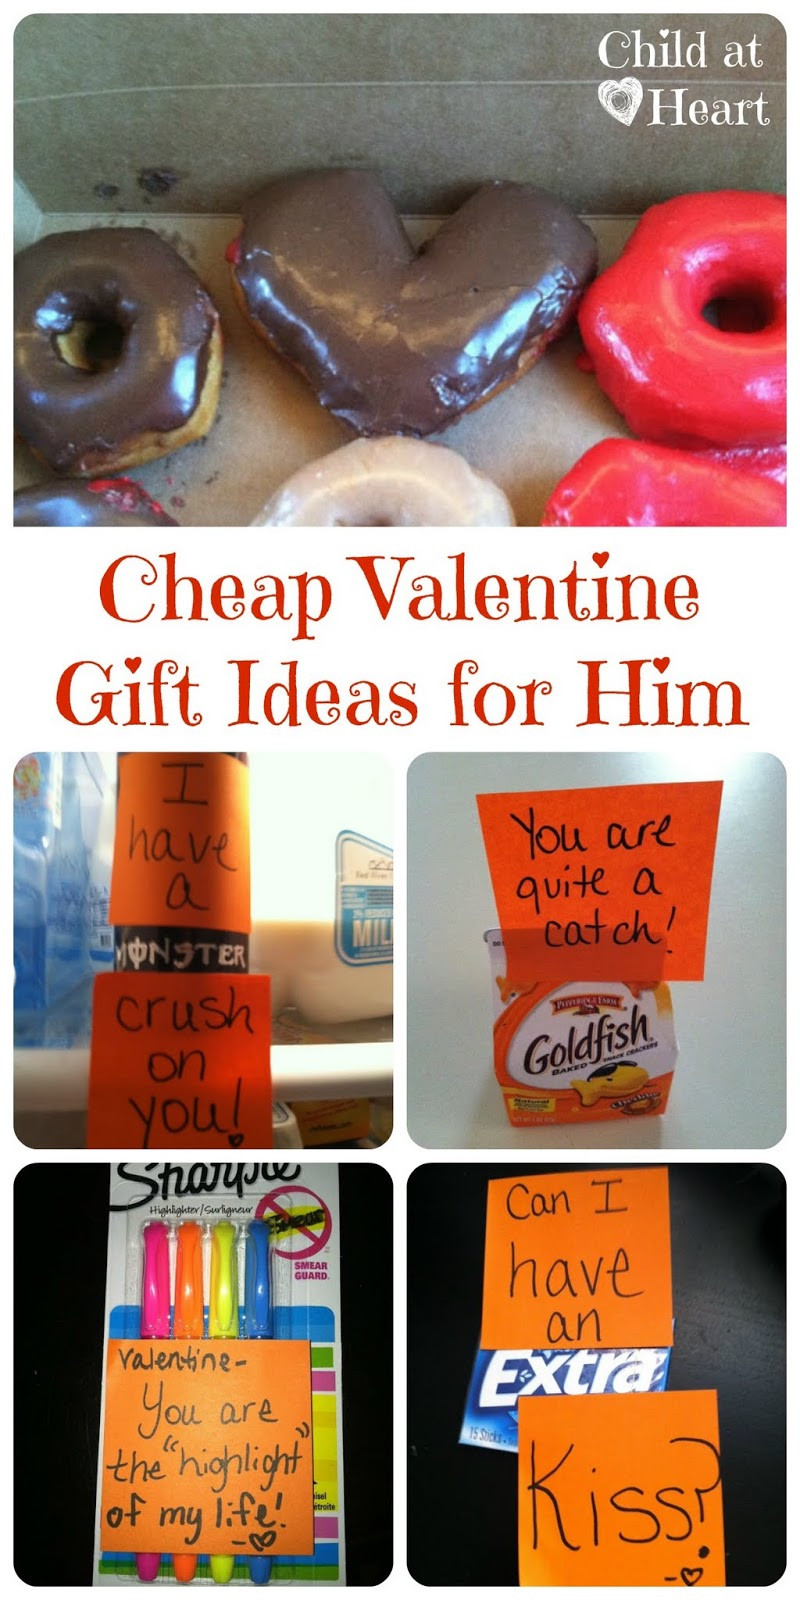 Gifts For Valentines Day For Him
 Cheap Valentine Gift Ideas for Him Child at Heart Blog